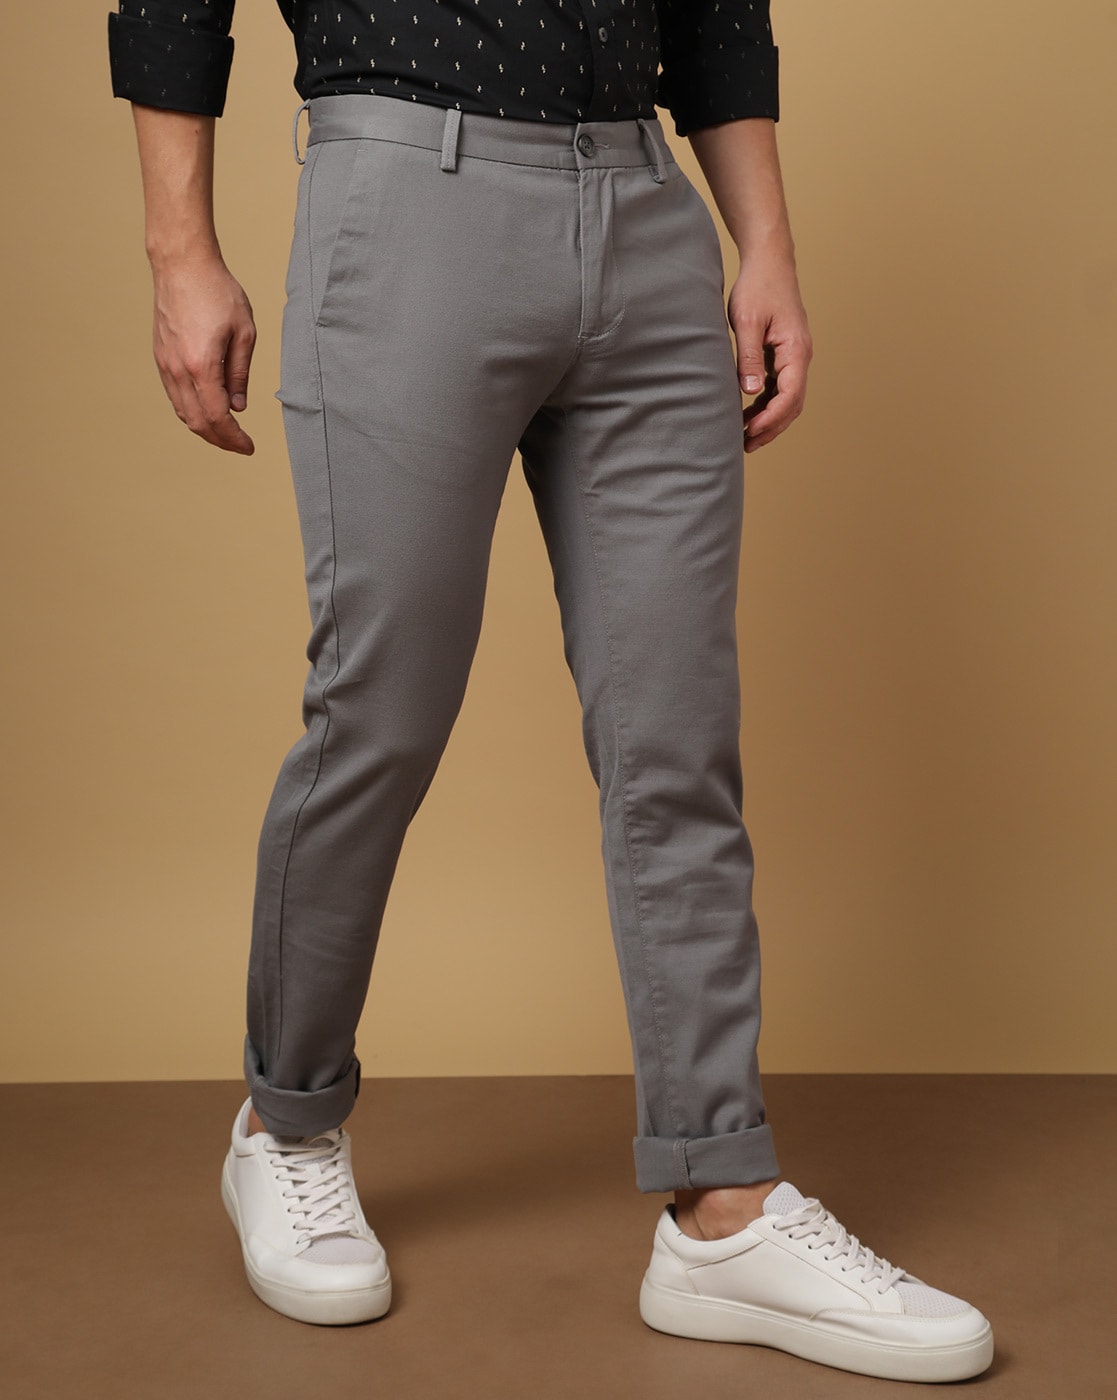 Buy Olive Trousers & Pants for Men by ARROW Online | Ajio.com